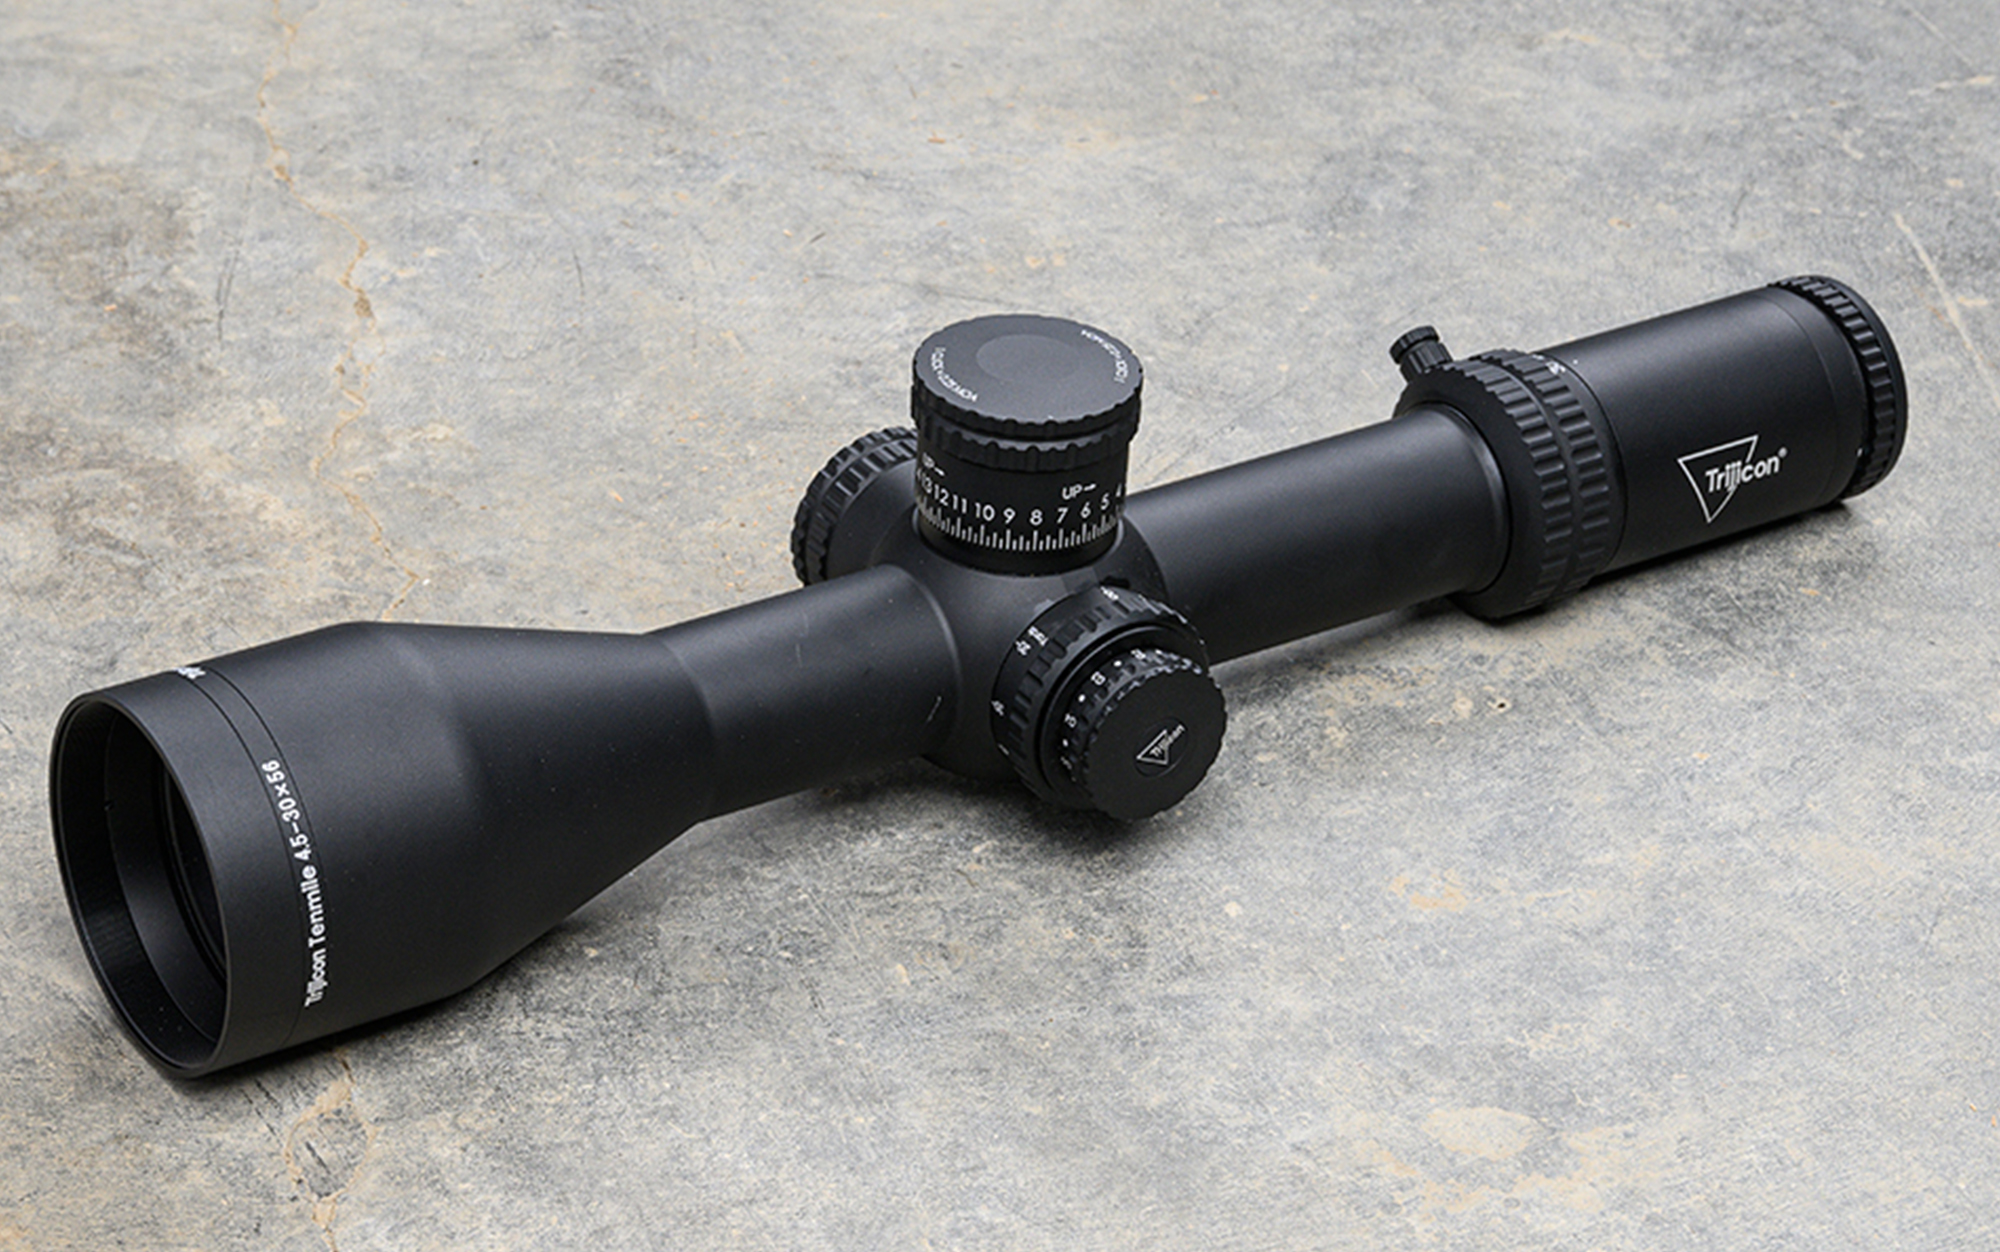 The Trijicon Tenmile 4.5-30x56 is the best high-magnification rifle scope.